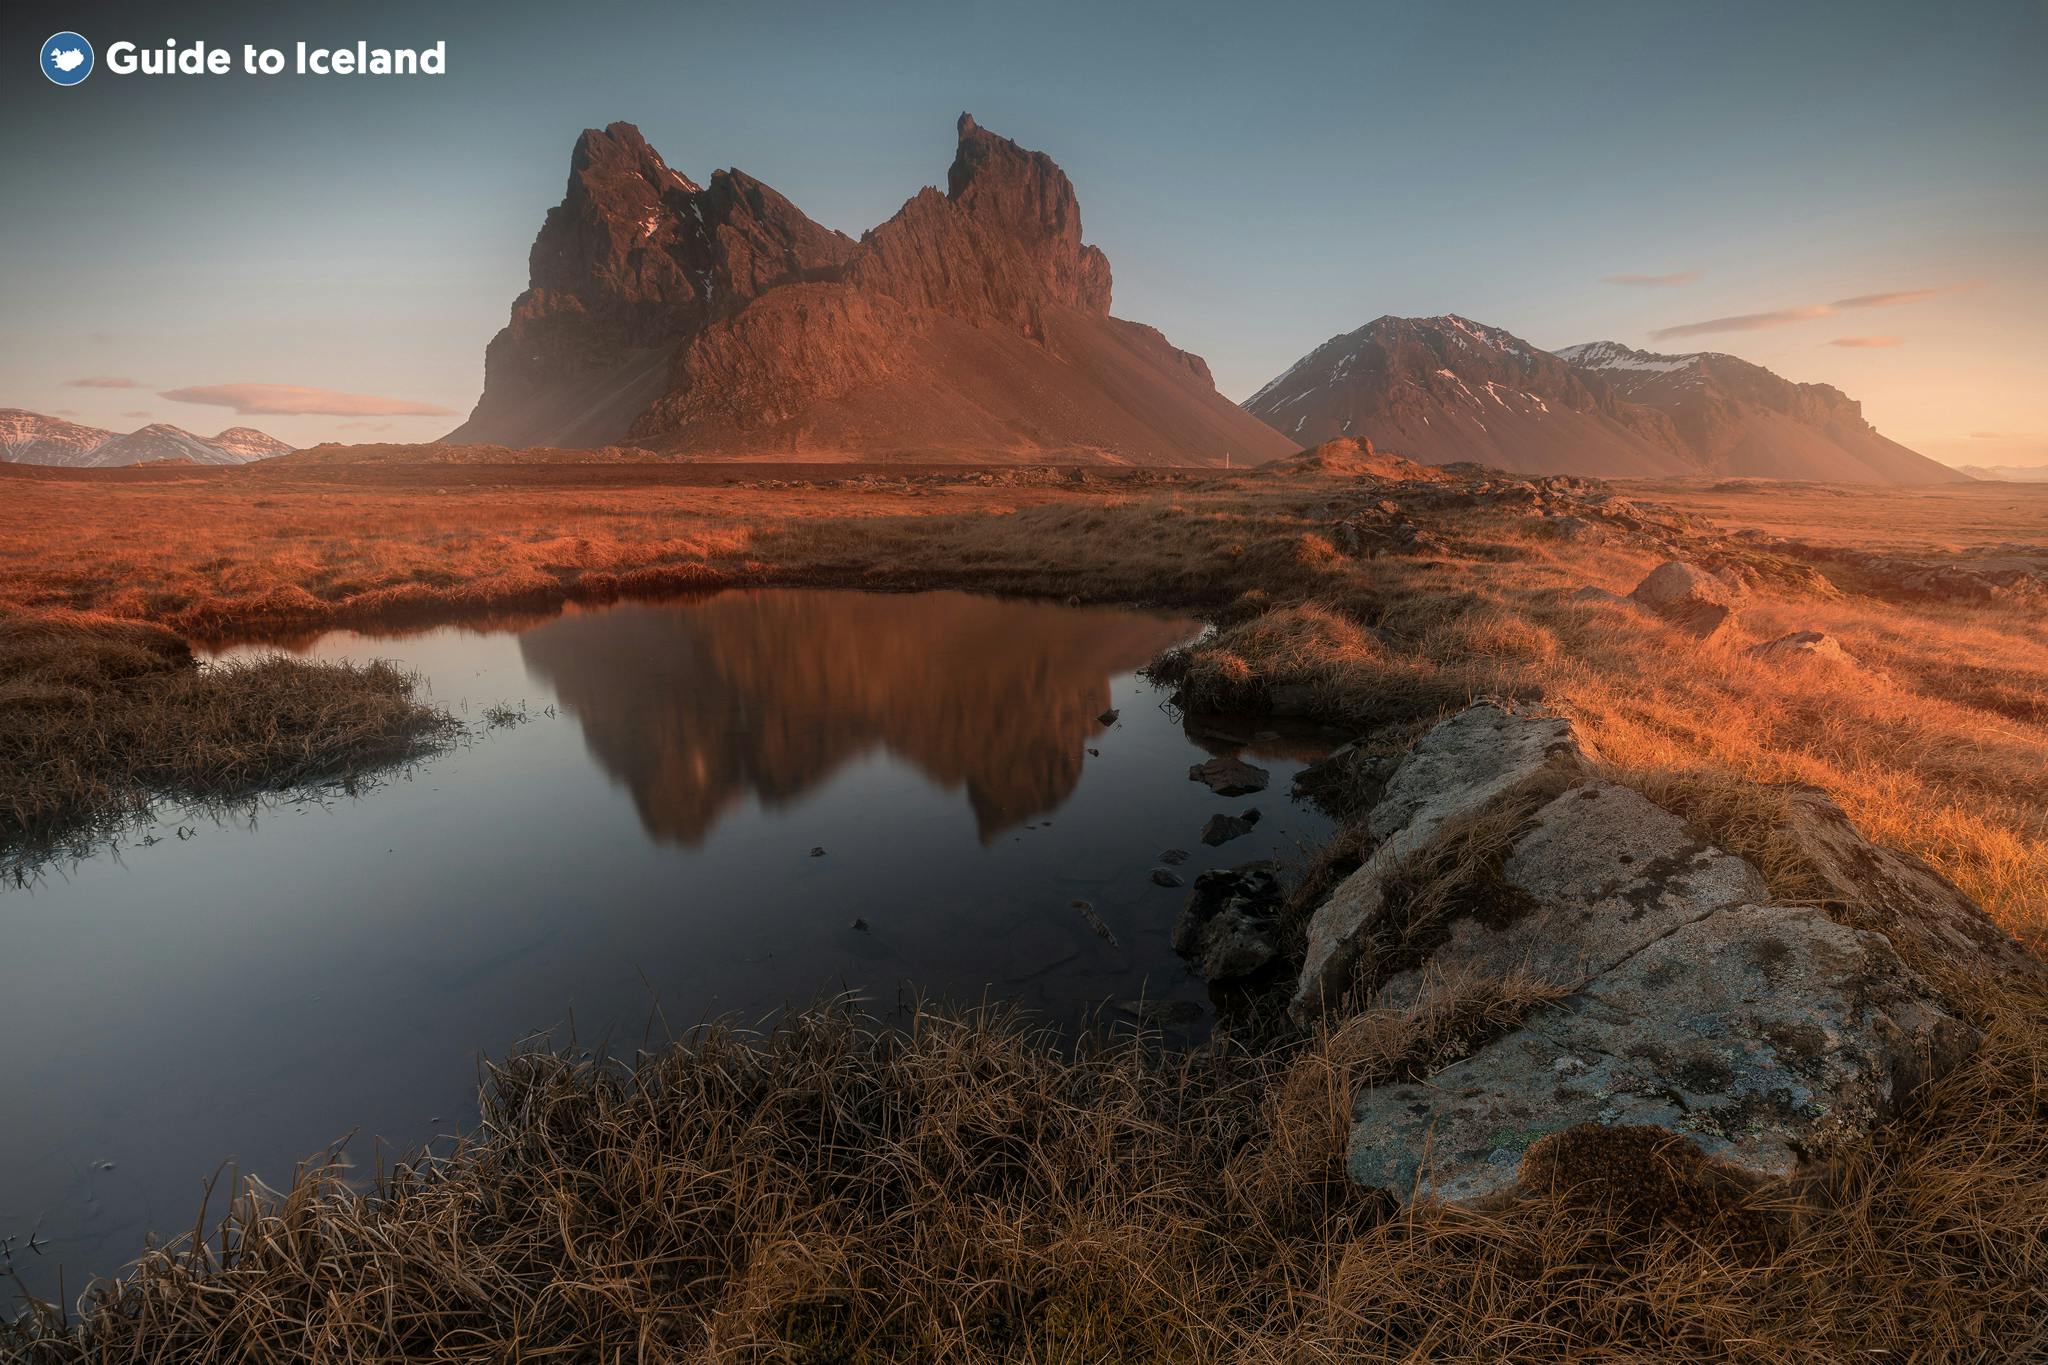 Eystrahorn Mountain in Iceland's remote Eastfjords pictured in summer.